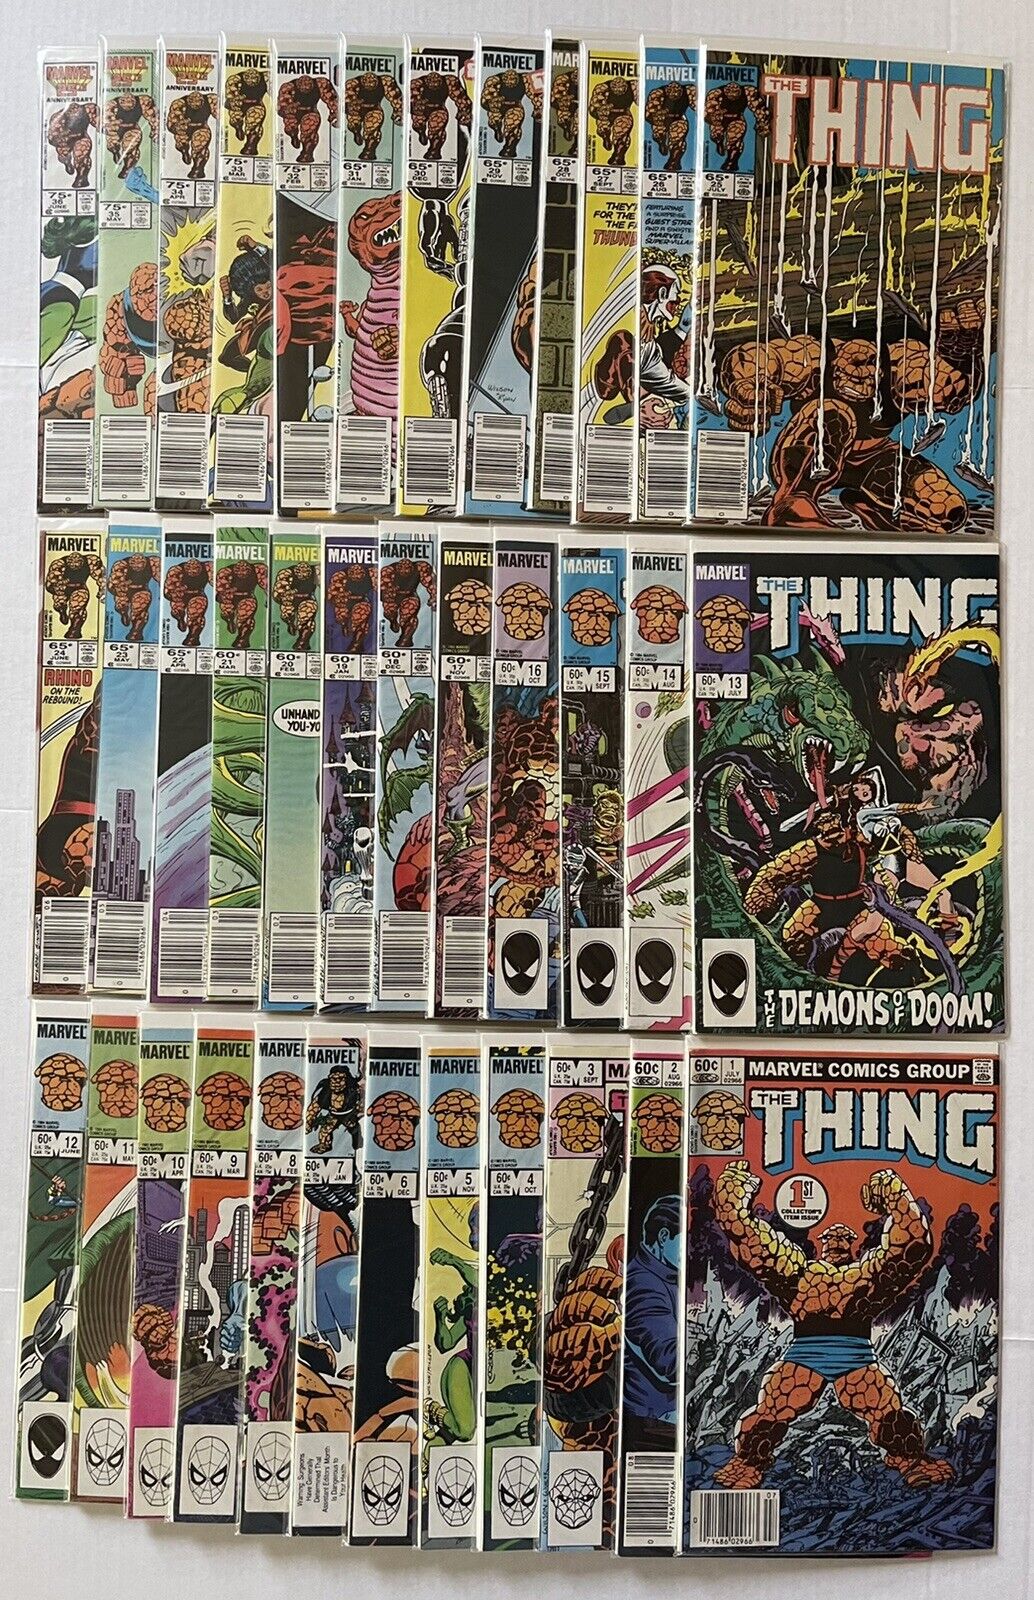 The THING #1-36 Complete (Marvel 1983) #35 1st Ms Marvel “Sharon Ventura”  NICE